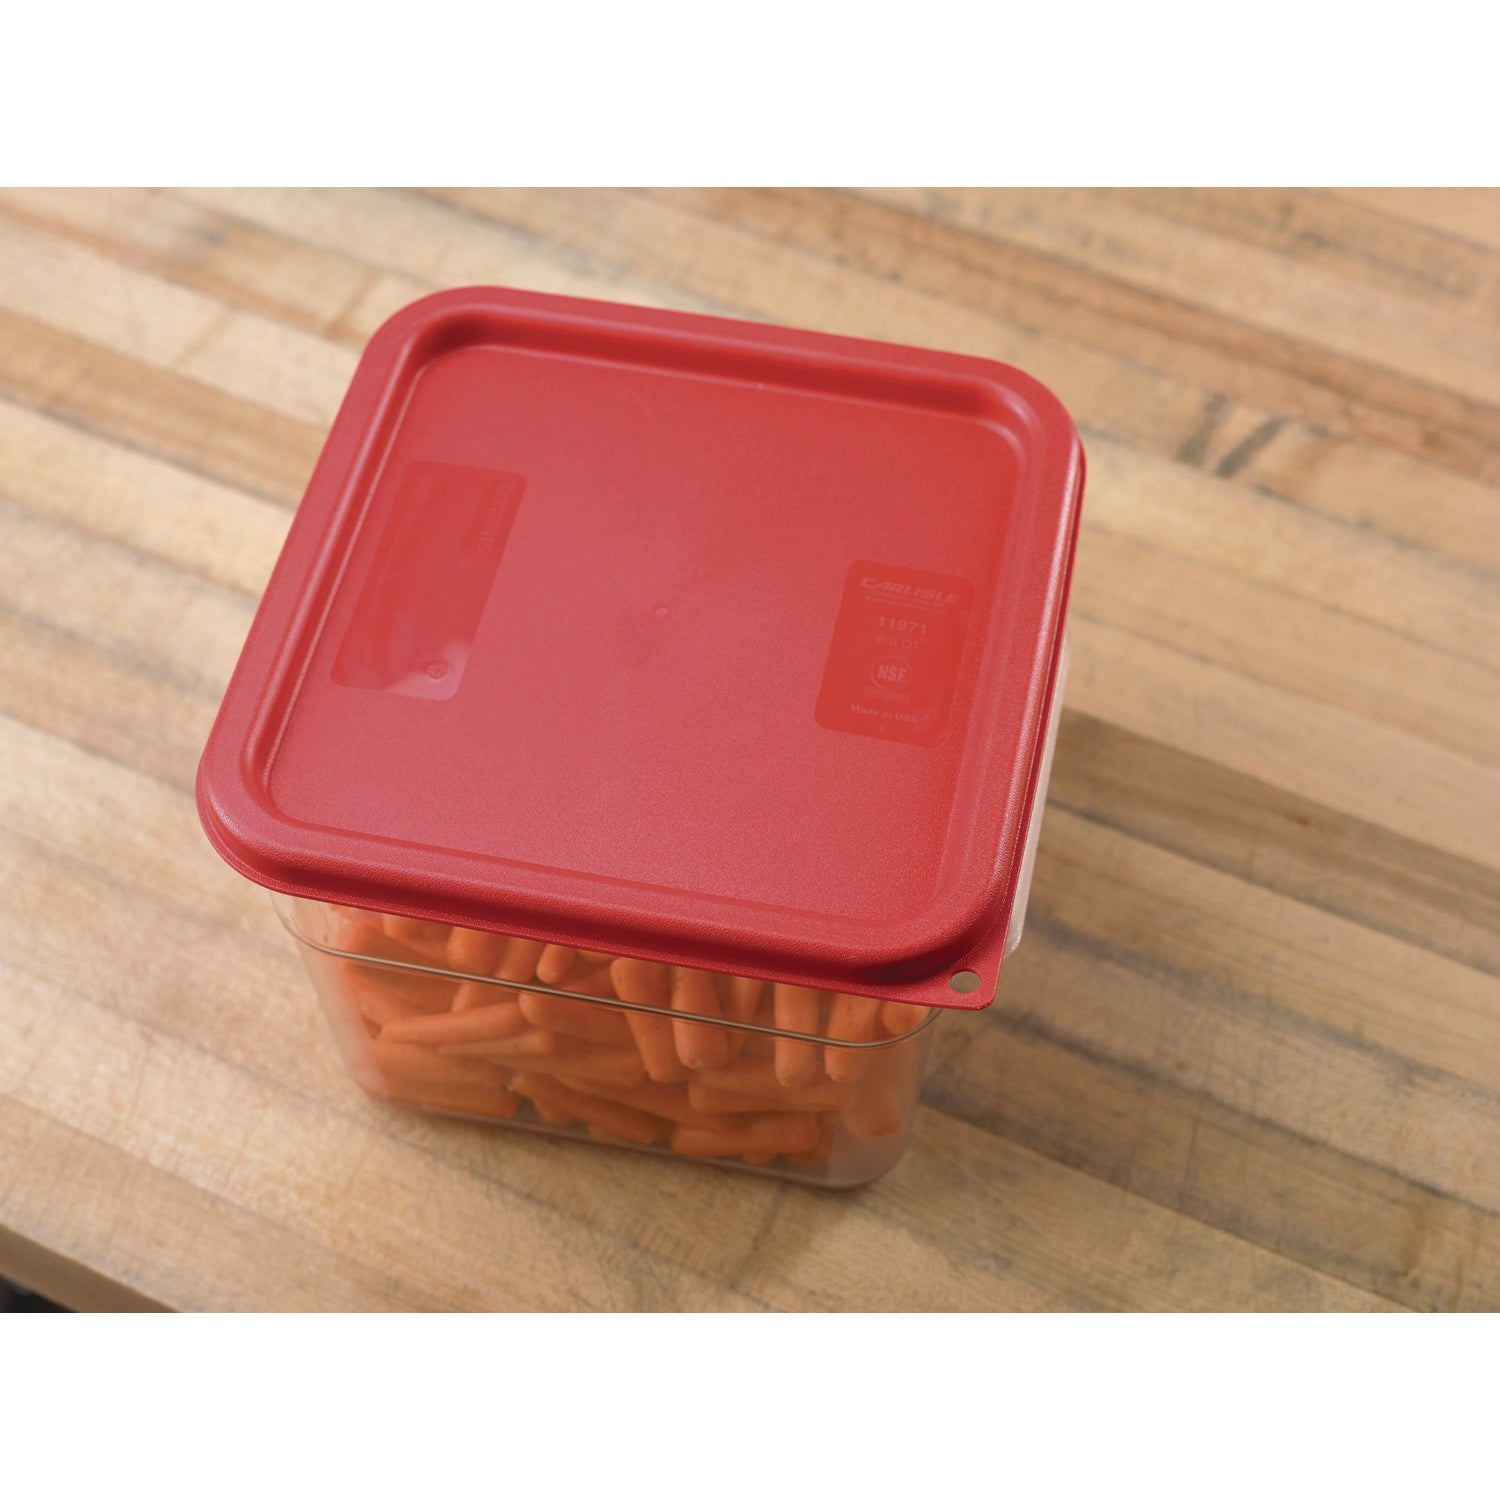 squares-food-storage-container-lid-9-x-9-x-063-red-plastic_cfs1197105 - 2